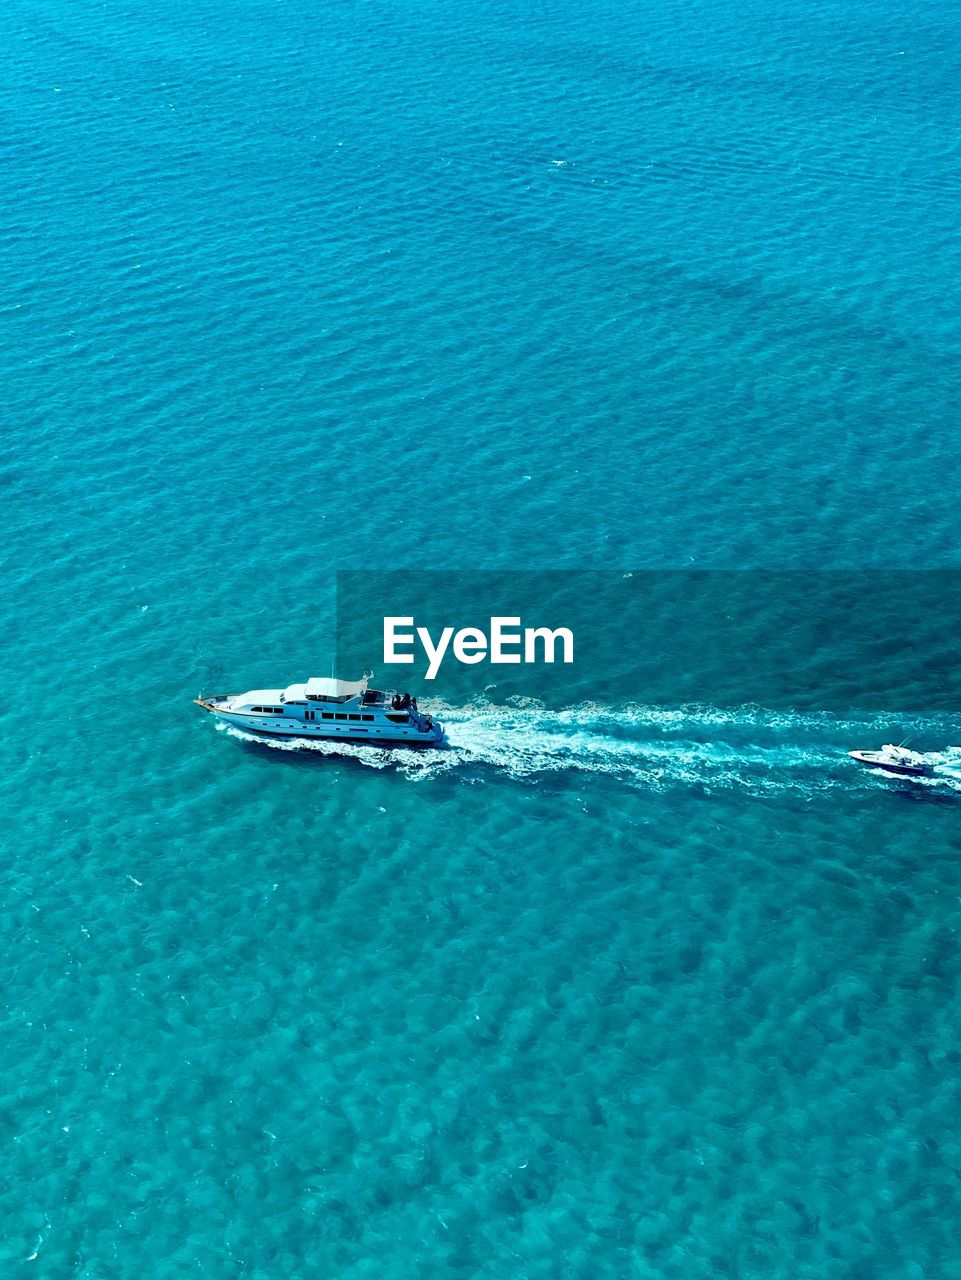 HIGH ANGLE VIEW OF BOAT IN SEA